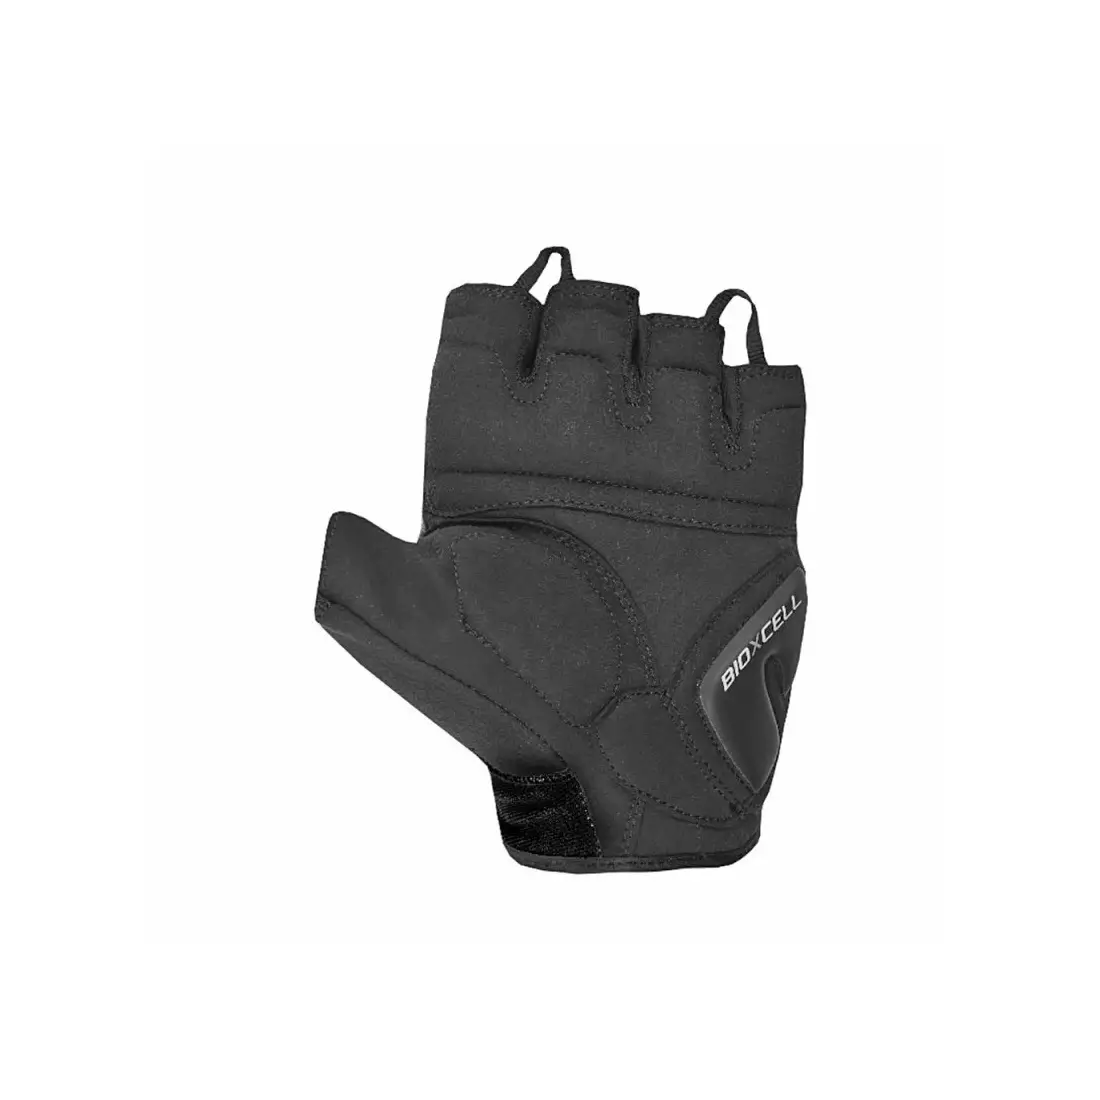 CHIBA BIOXCELL SUPER FLY cycling gloves black 3060318